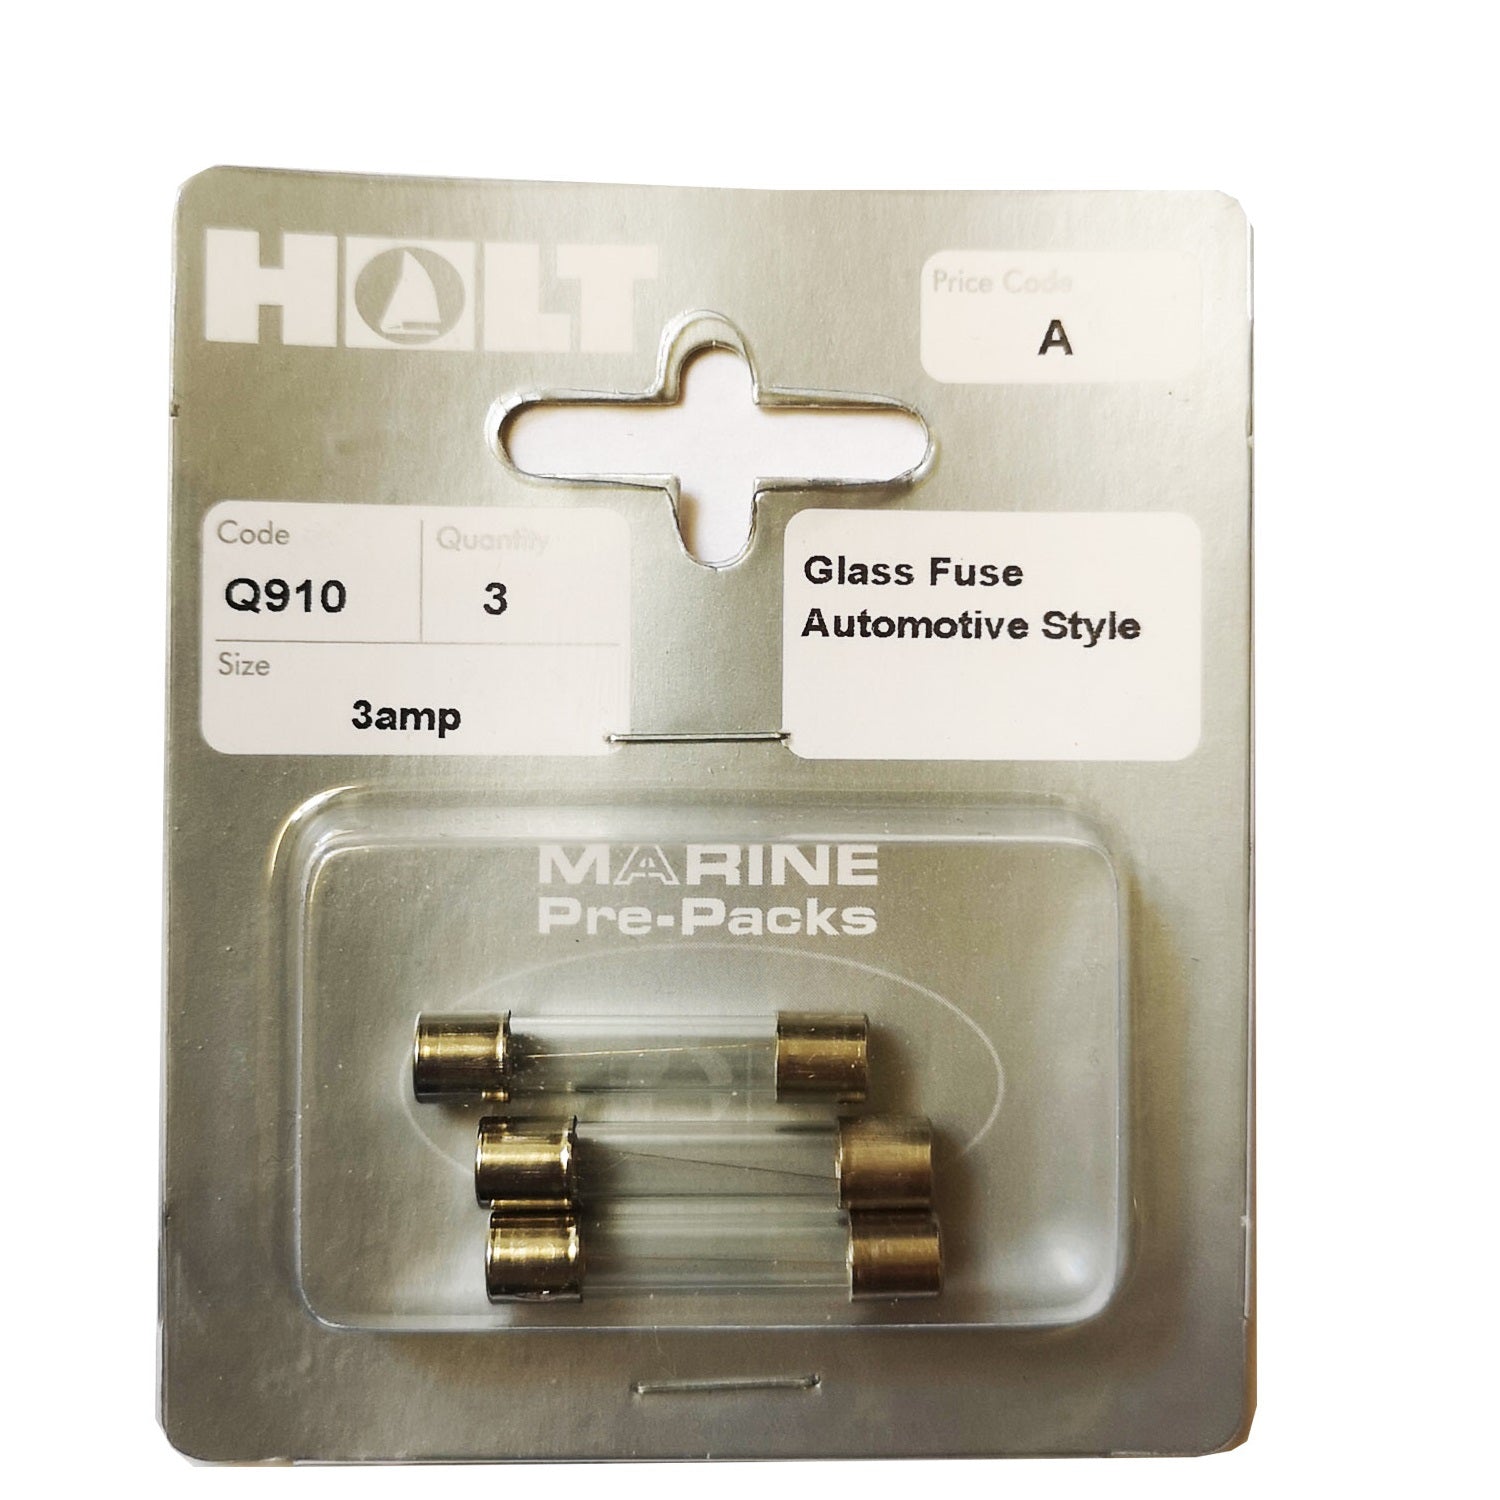 Holt Marine Q910 Automotive Style Glass Fuse Pkt3 - 3amp - Premium Fuses from Holt Marine - Just $1.99! Shop now at W Hurst & Son (IW) Ltd